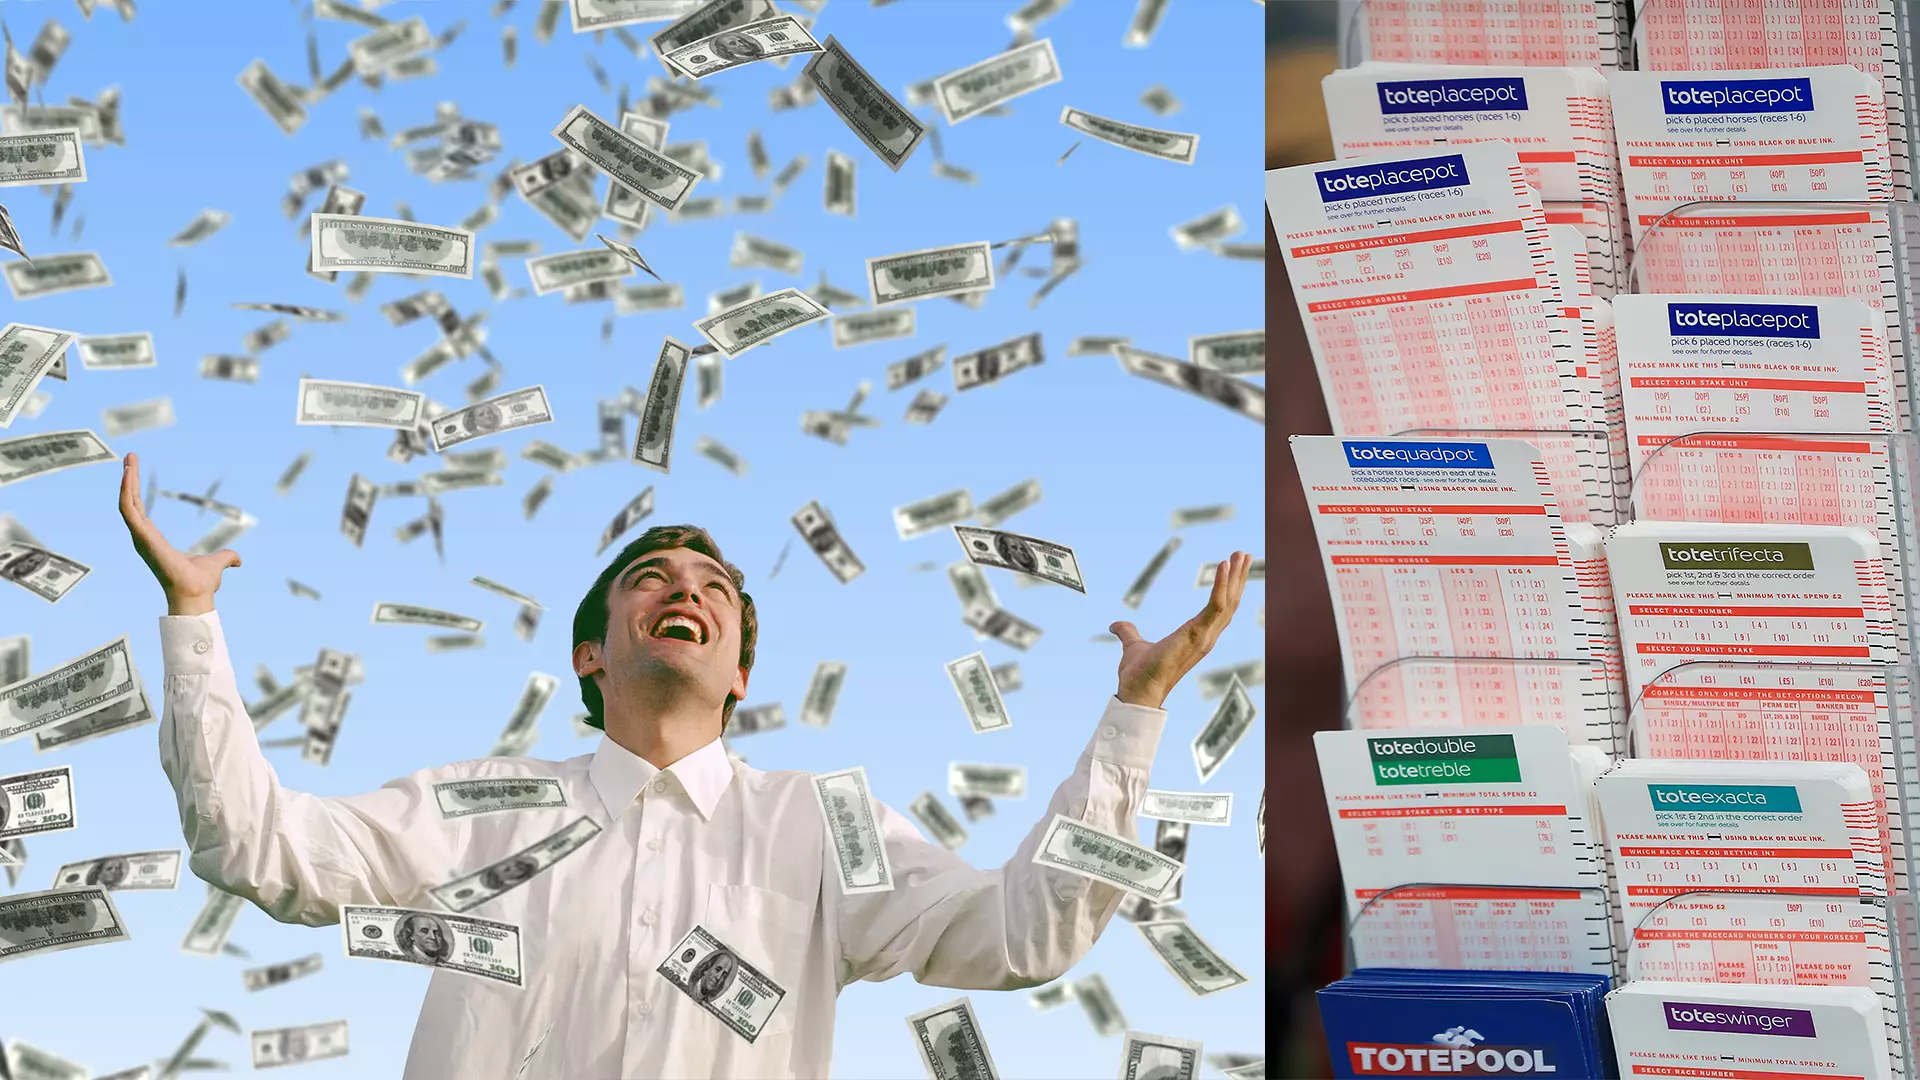 Lucky Punter Wins Over £1K From Ridiculous £10 Bet